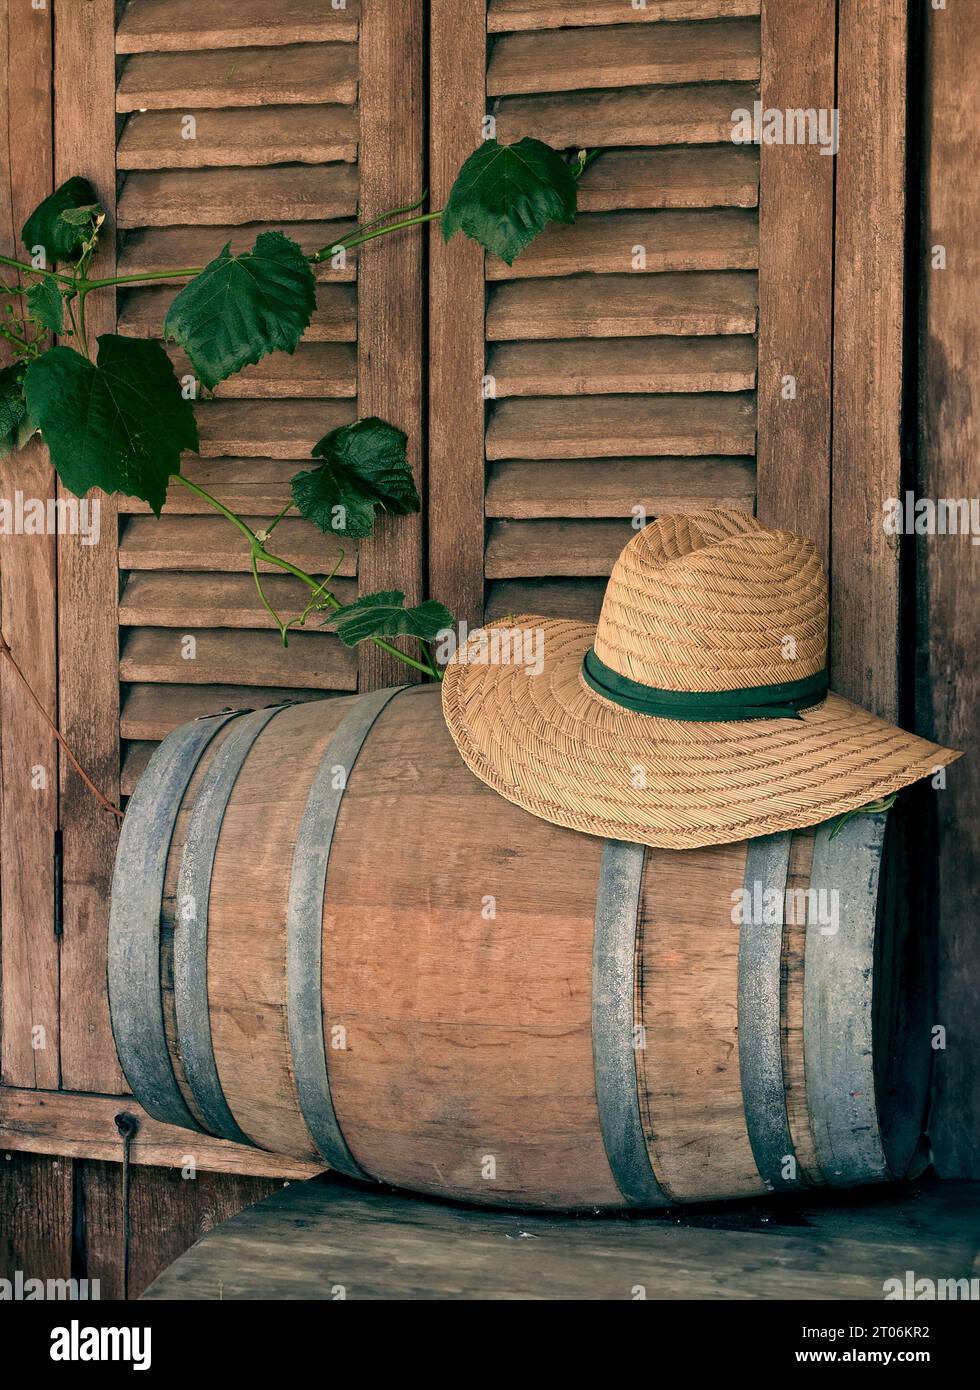 CALIFORNIA WINE TASTING TOUR STILL LIFE LIFESTYLE  Concept wine making tasting image of straw hat on wine barrel with window shutters and Merlot vine leaves Sonoma California USA Stock Photo